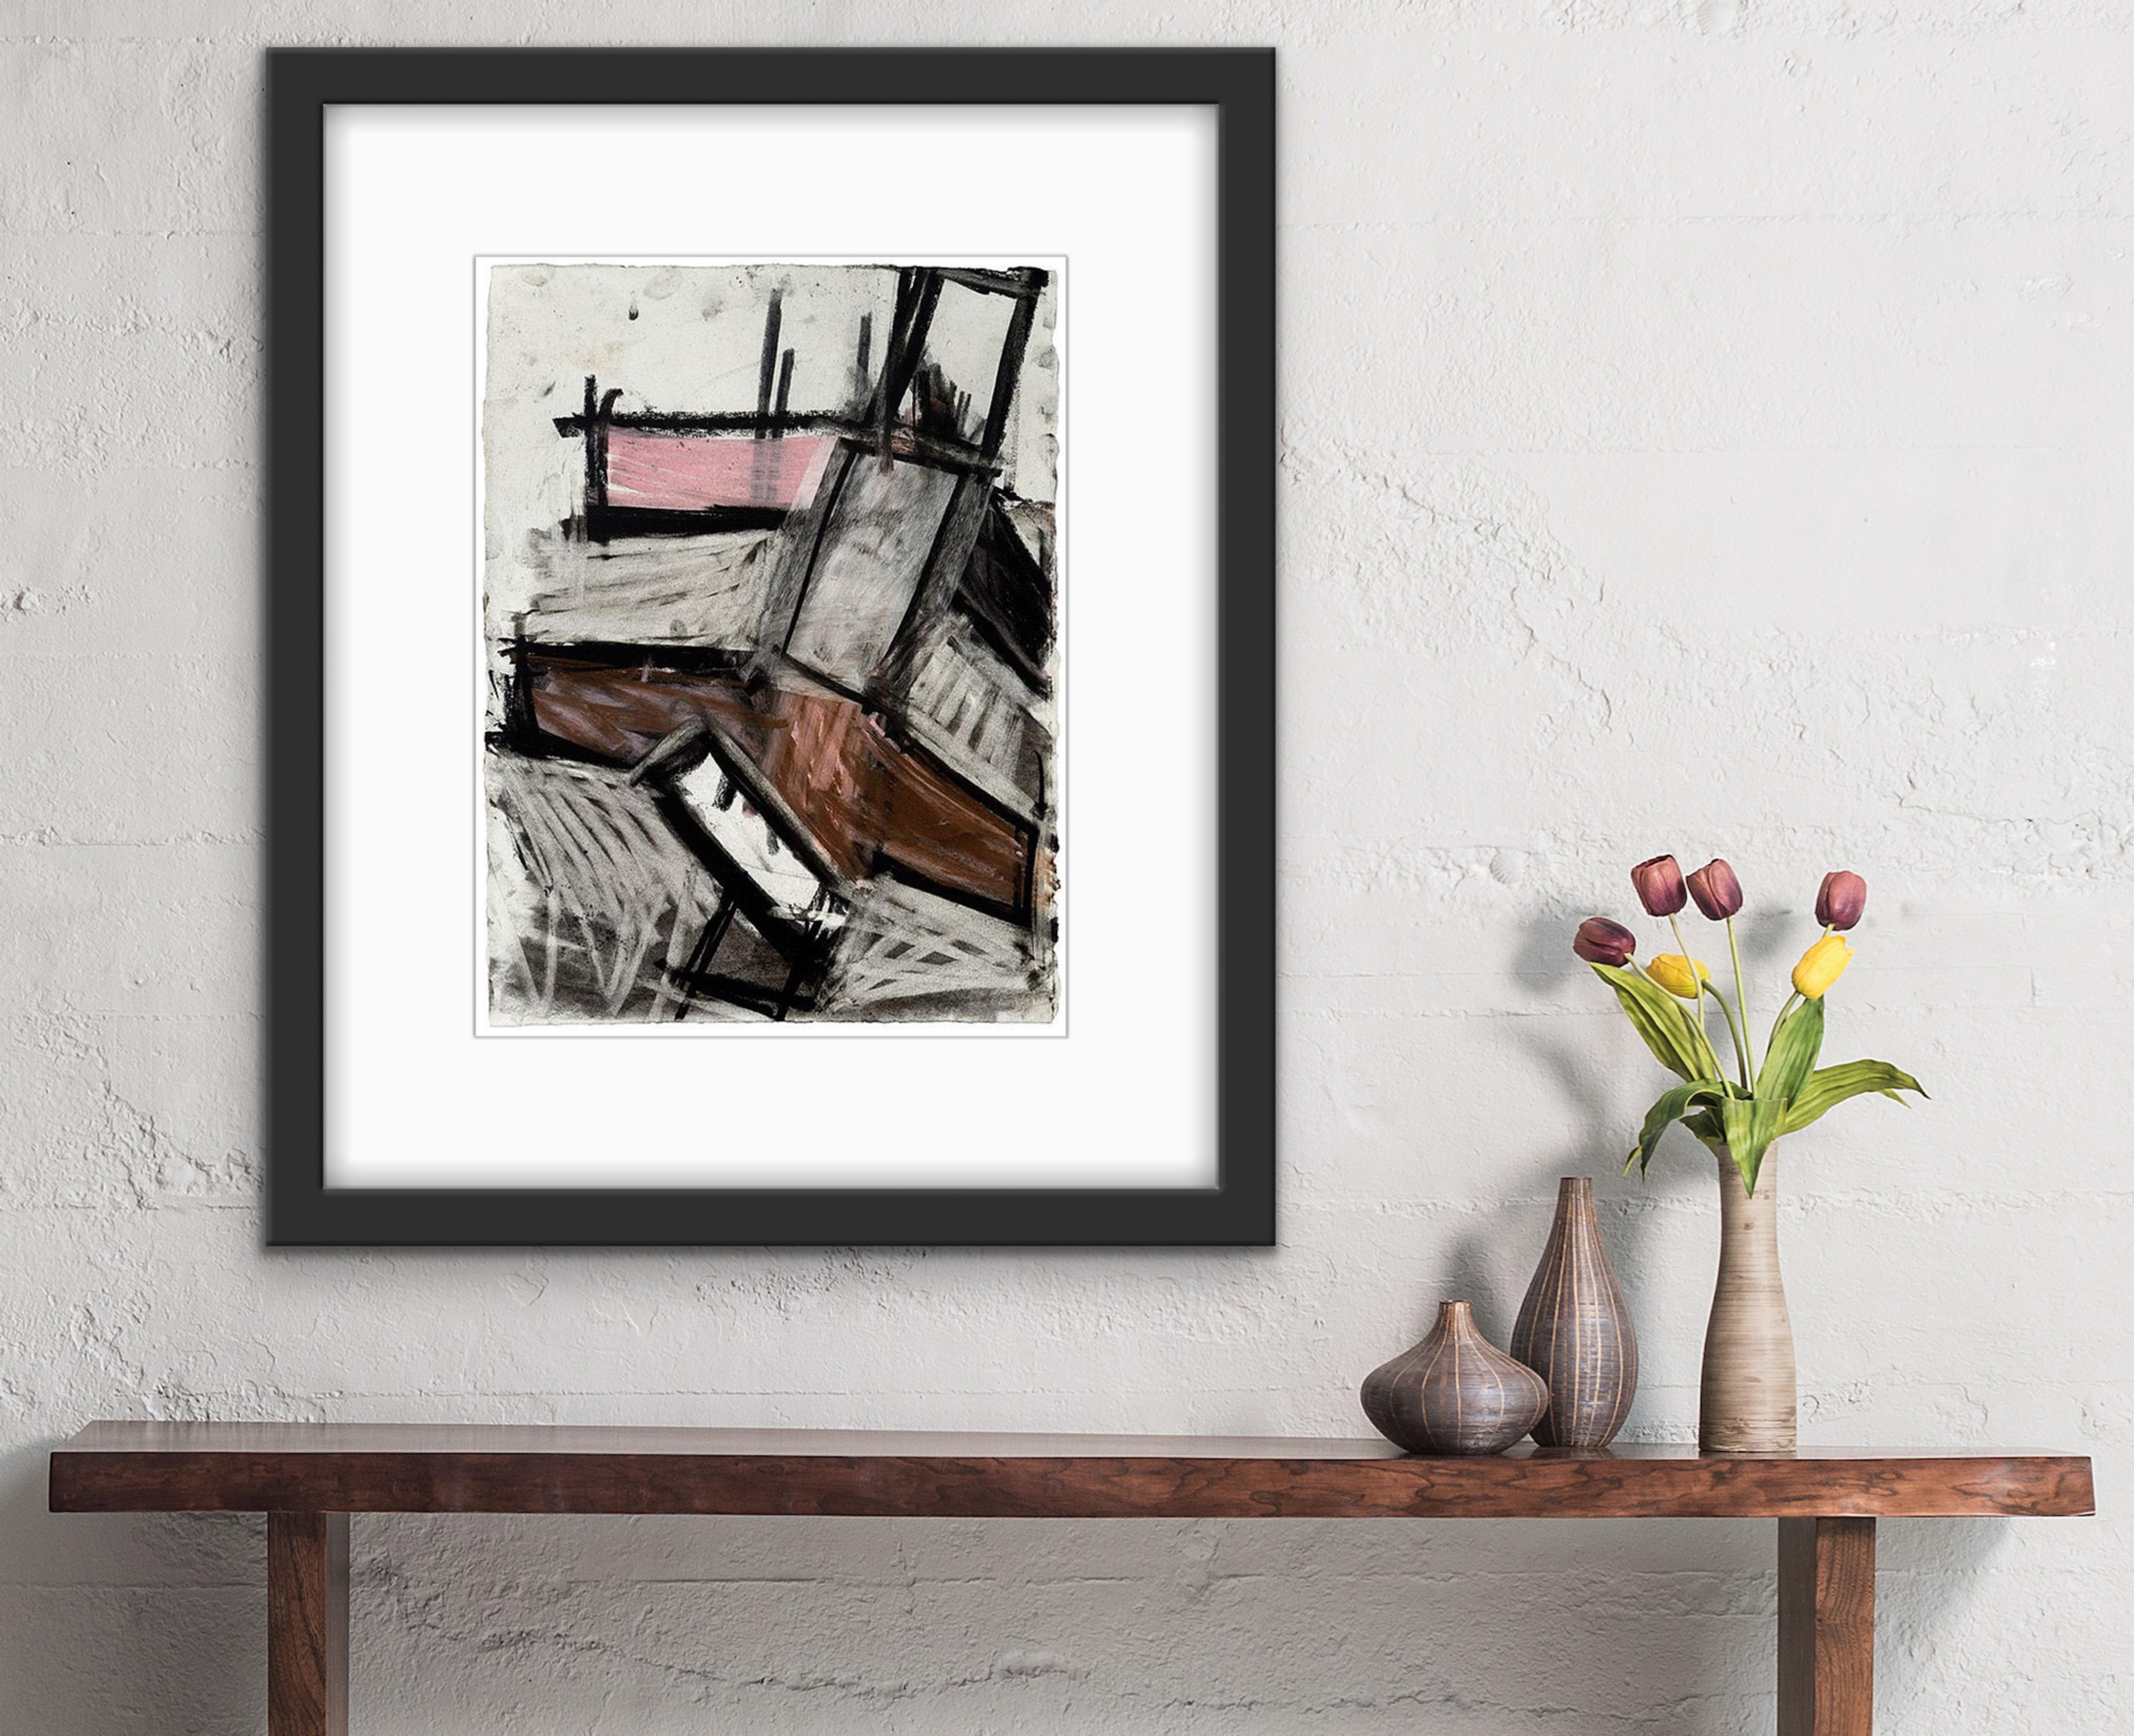 A lovely 1985 sculptural drawing by Joel Shapiro utilizing shades of pink, brown, white, gray and black. Signed on the verso. Framed
Provenance: McIntosh/Drysdale Gallery, Washington, DC............ 
Joel Shapiro (born September 27, 1941, New York